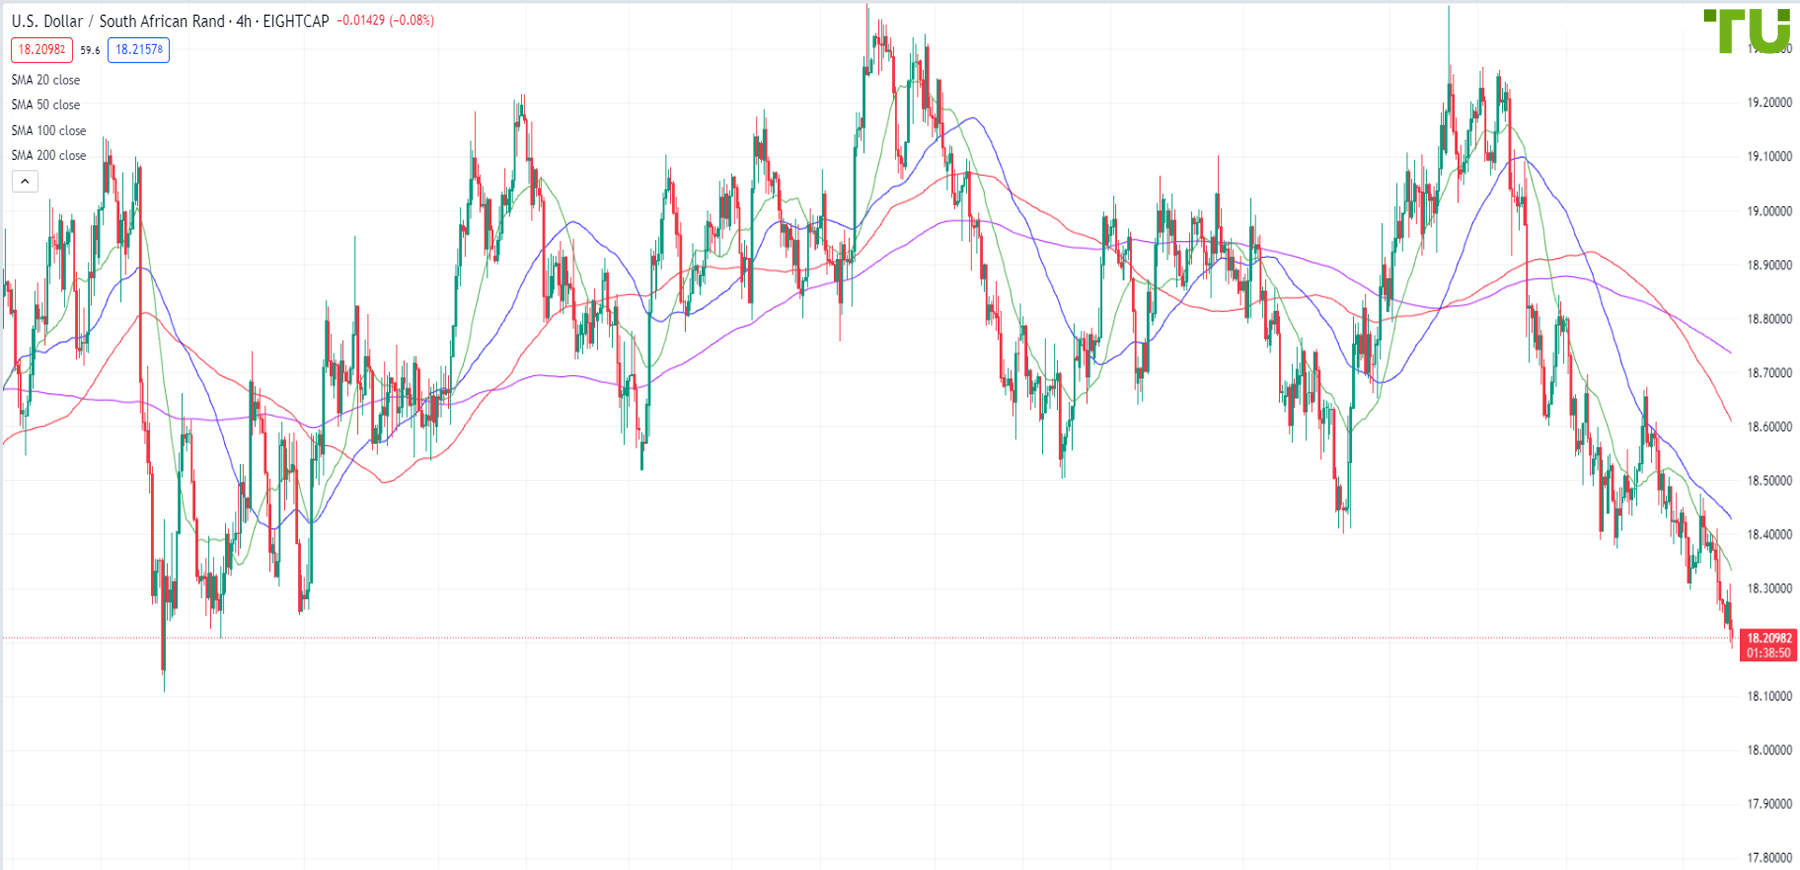 USD/ZAR is approaching strong support